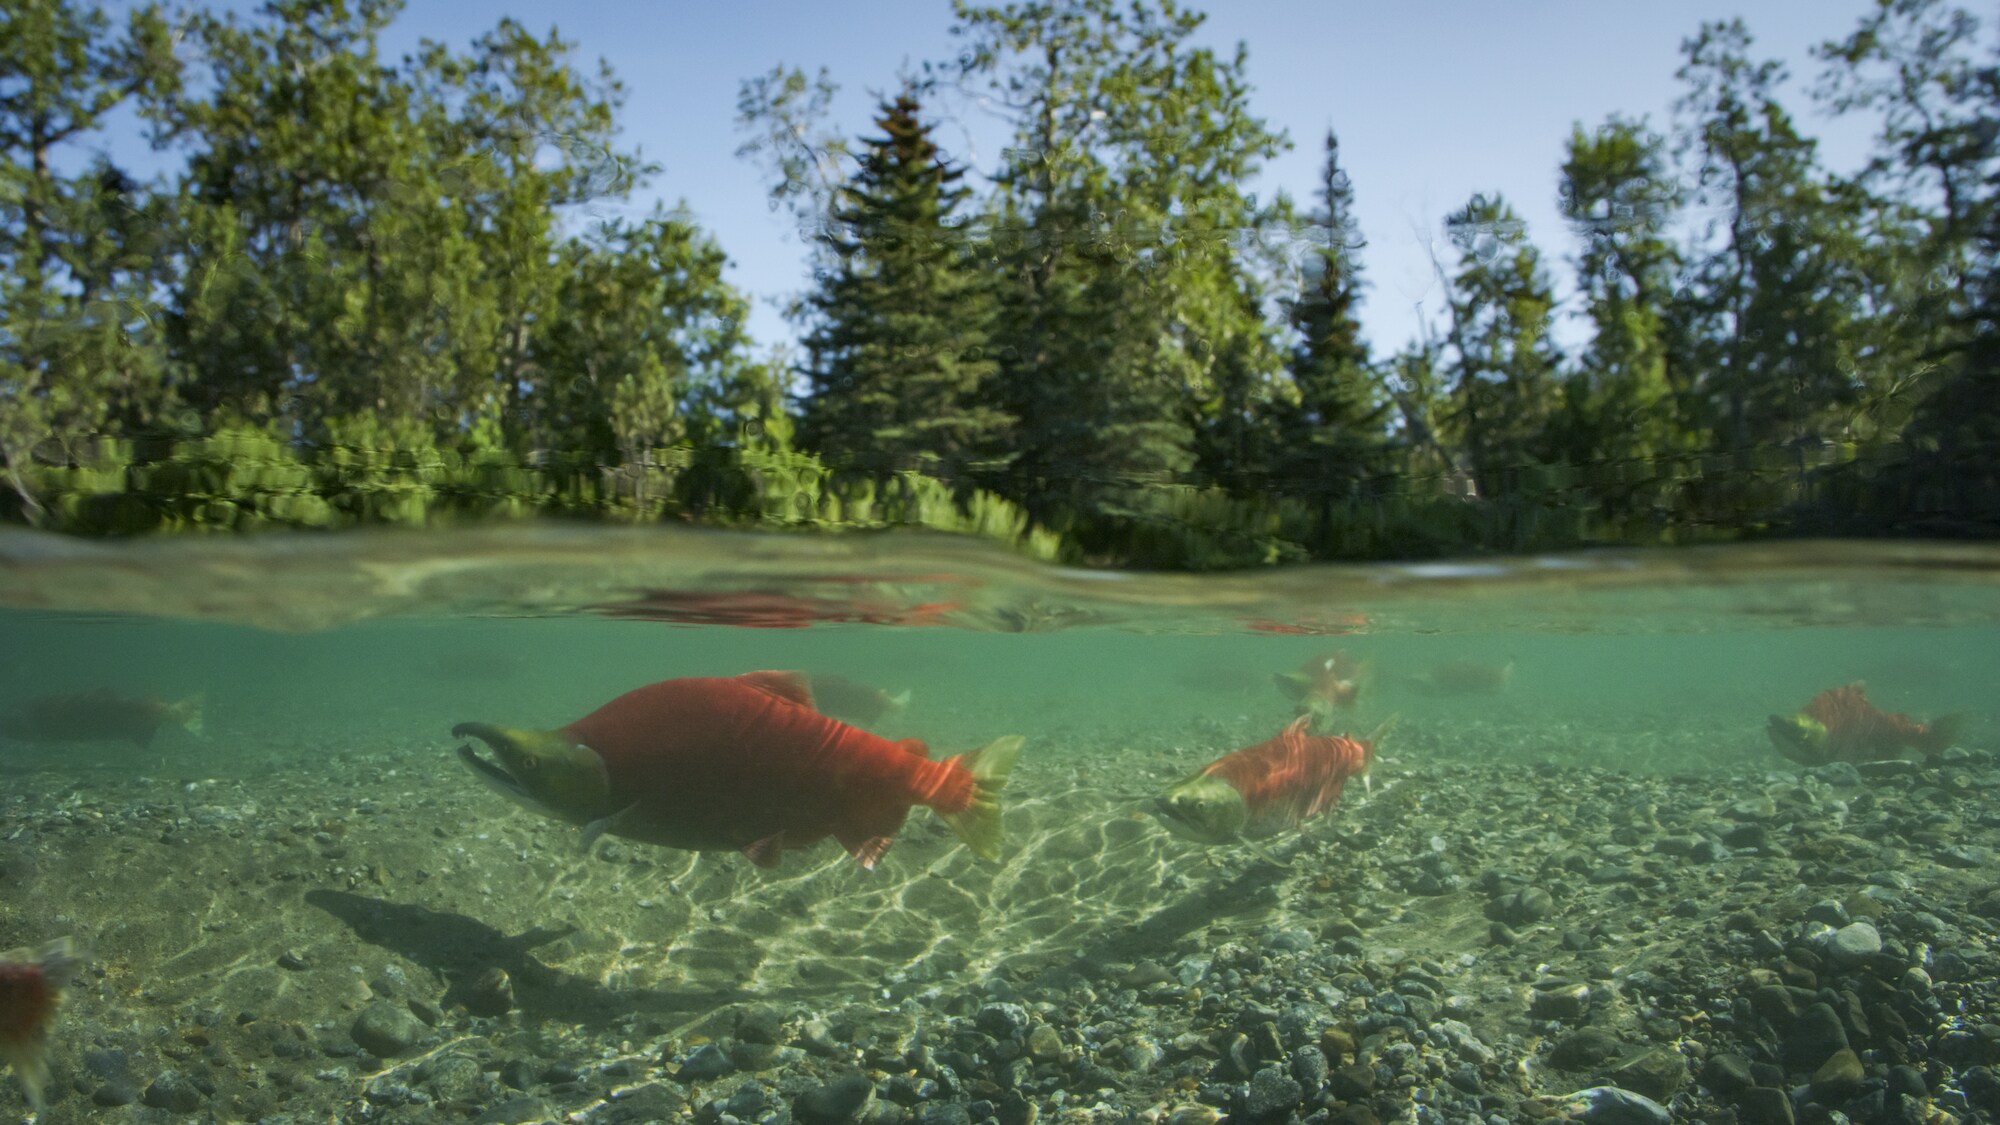 A sockeye salmon female is drawn in by the male's large hump during spawning. (National Geographic for Disney+)